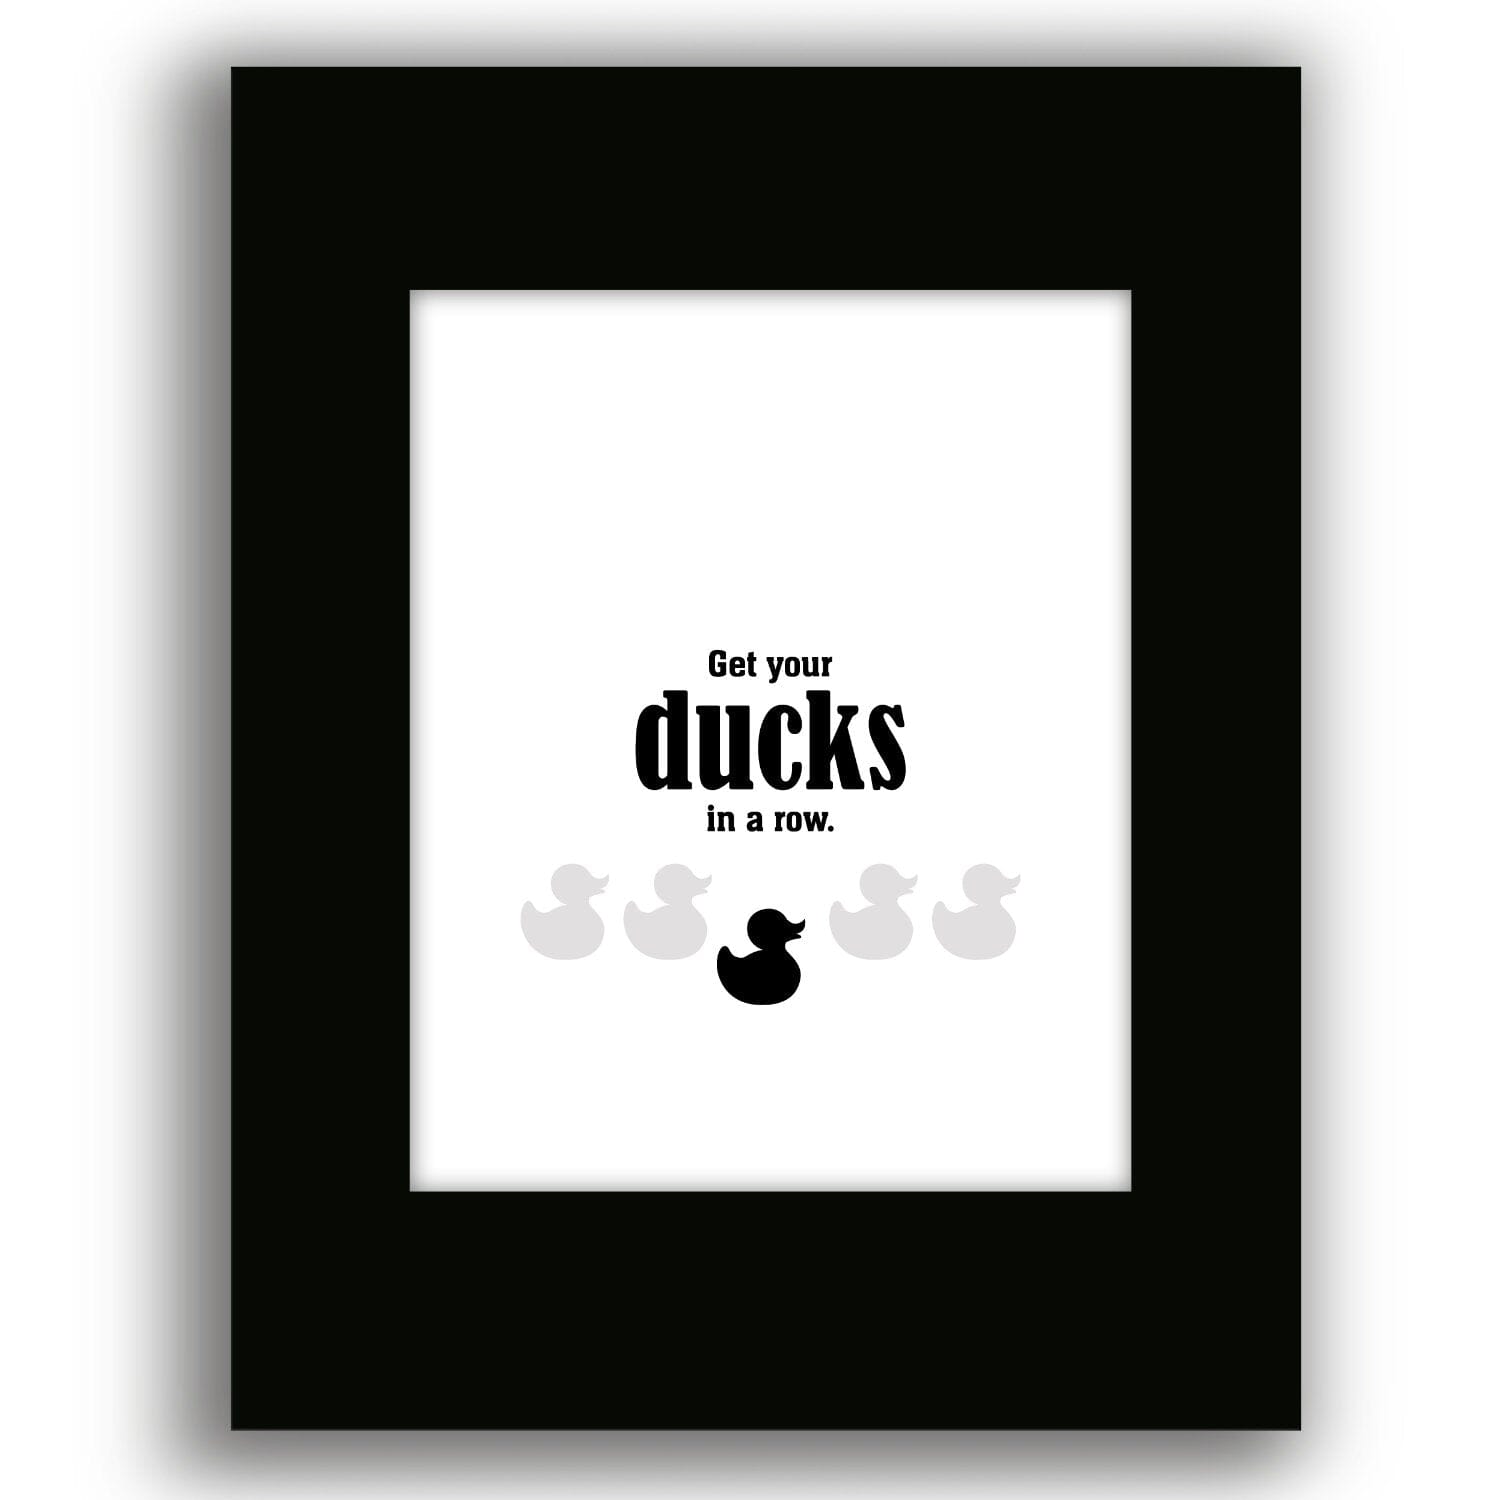 Wise and Witty Sarcastic Print - Get Your Ducks in a Row Wise and Wiseass Quotes Song Lyrics Art 8x10 Black Matted Print 